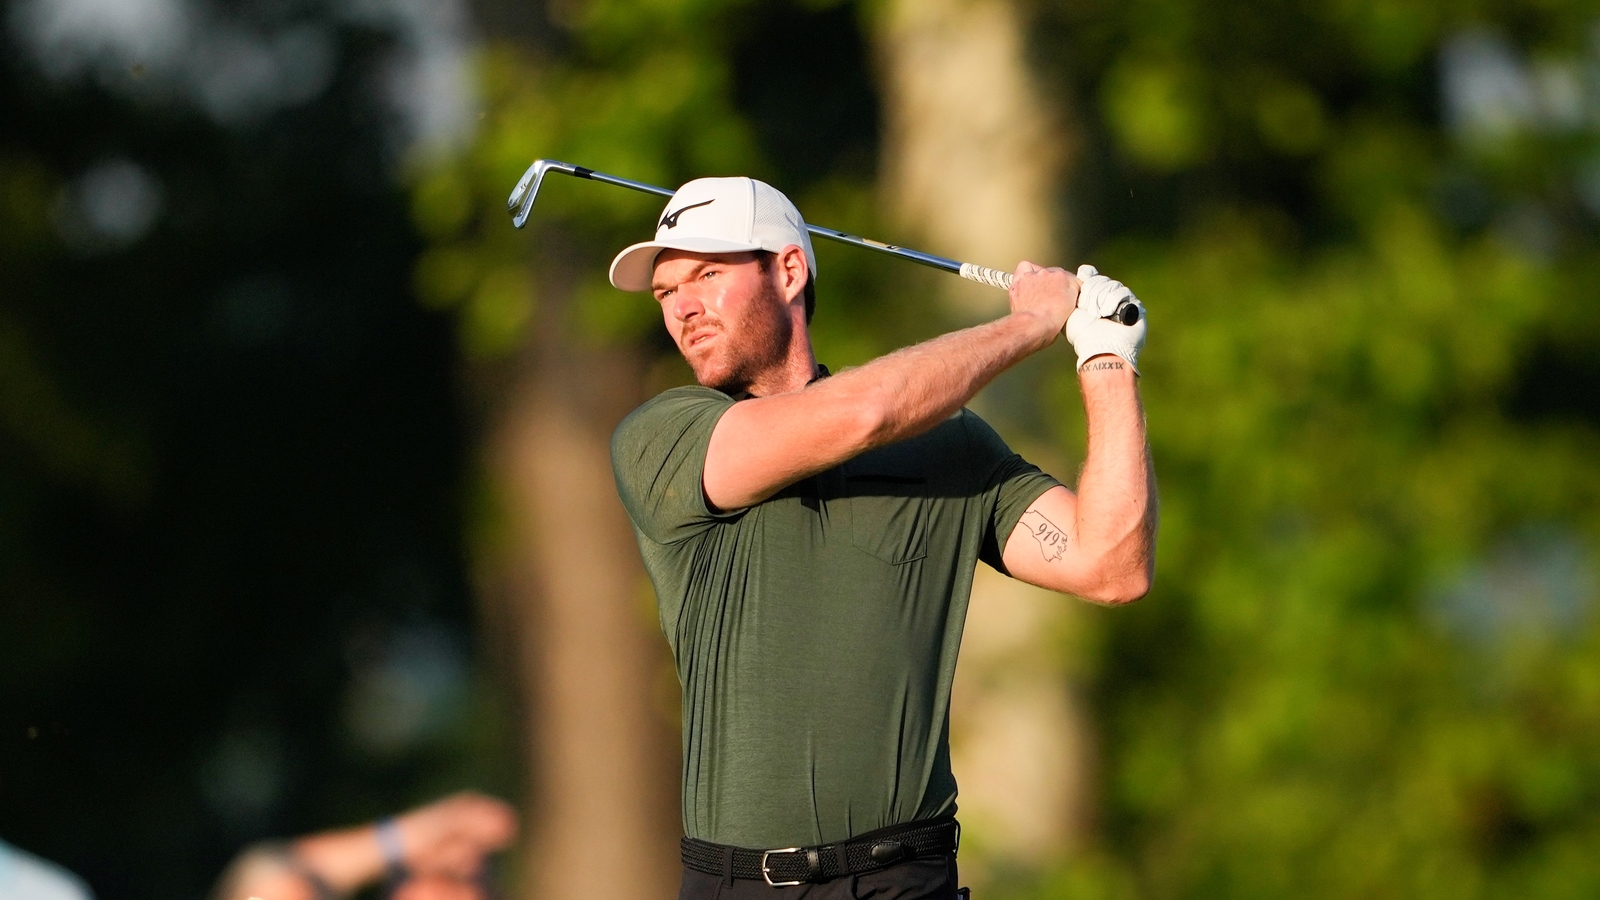 PGA Tour golfer Grayson Murray dies at age 30 day after withdrawing from Charles Schwab Cup Challenge at Colonial, officials say [Video]